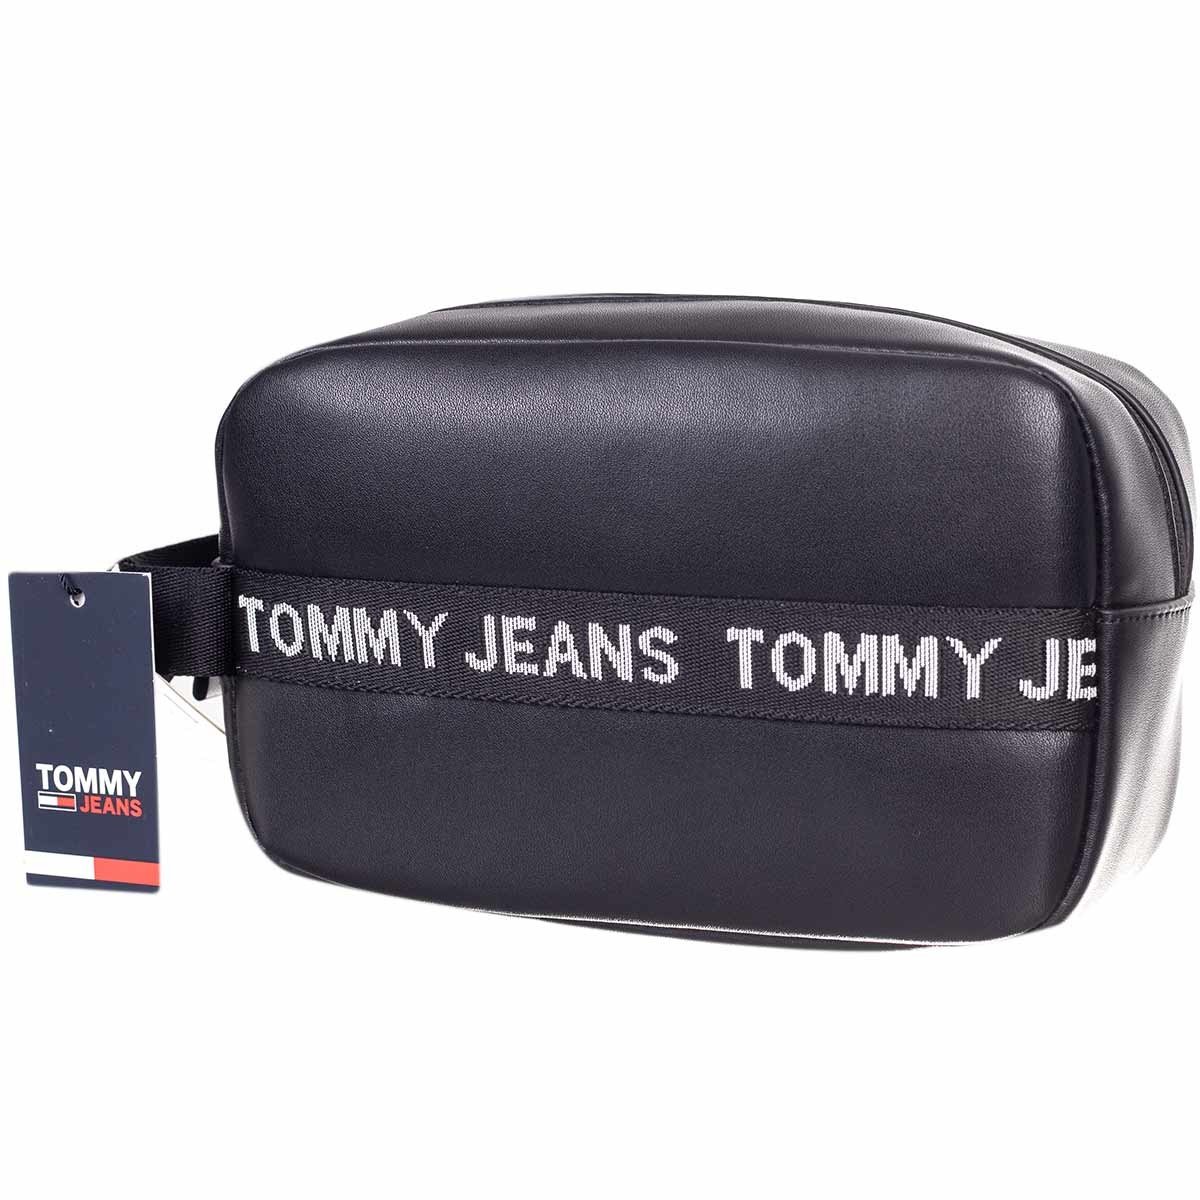 Tommy Hilfiger Jeans Man's Cosmetic Bags 8720644240625